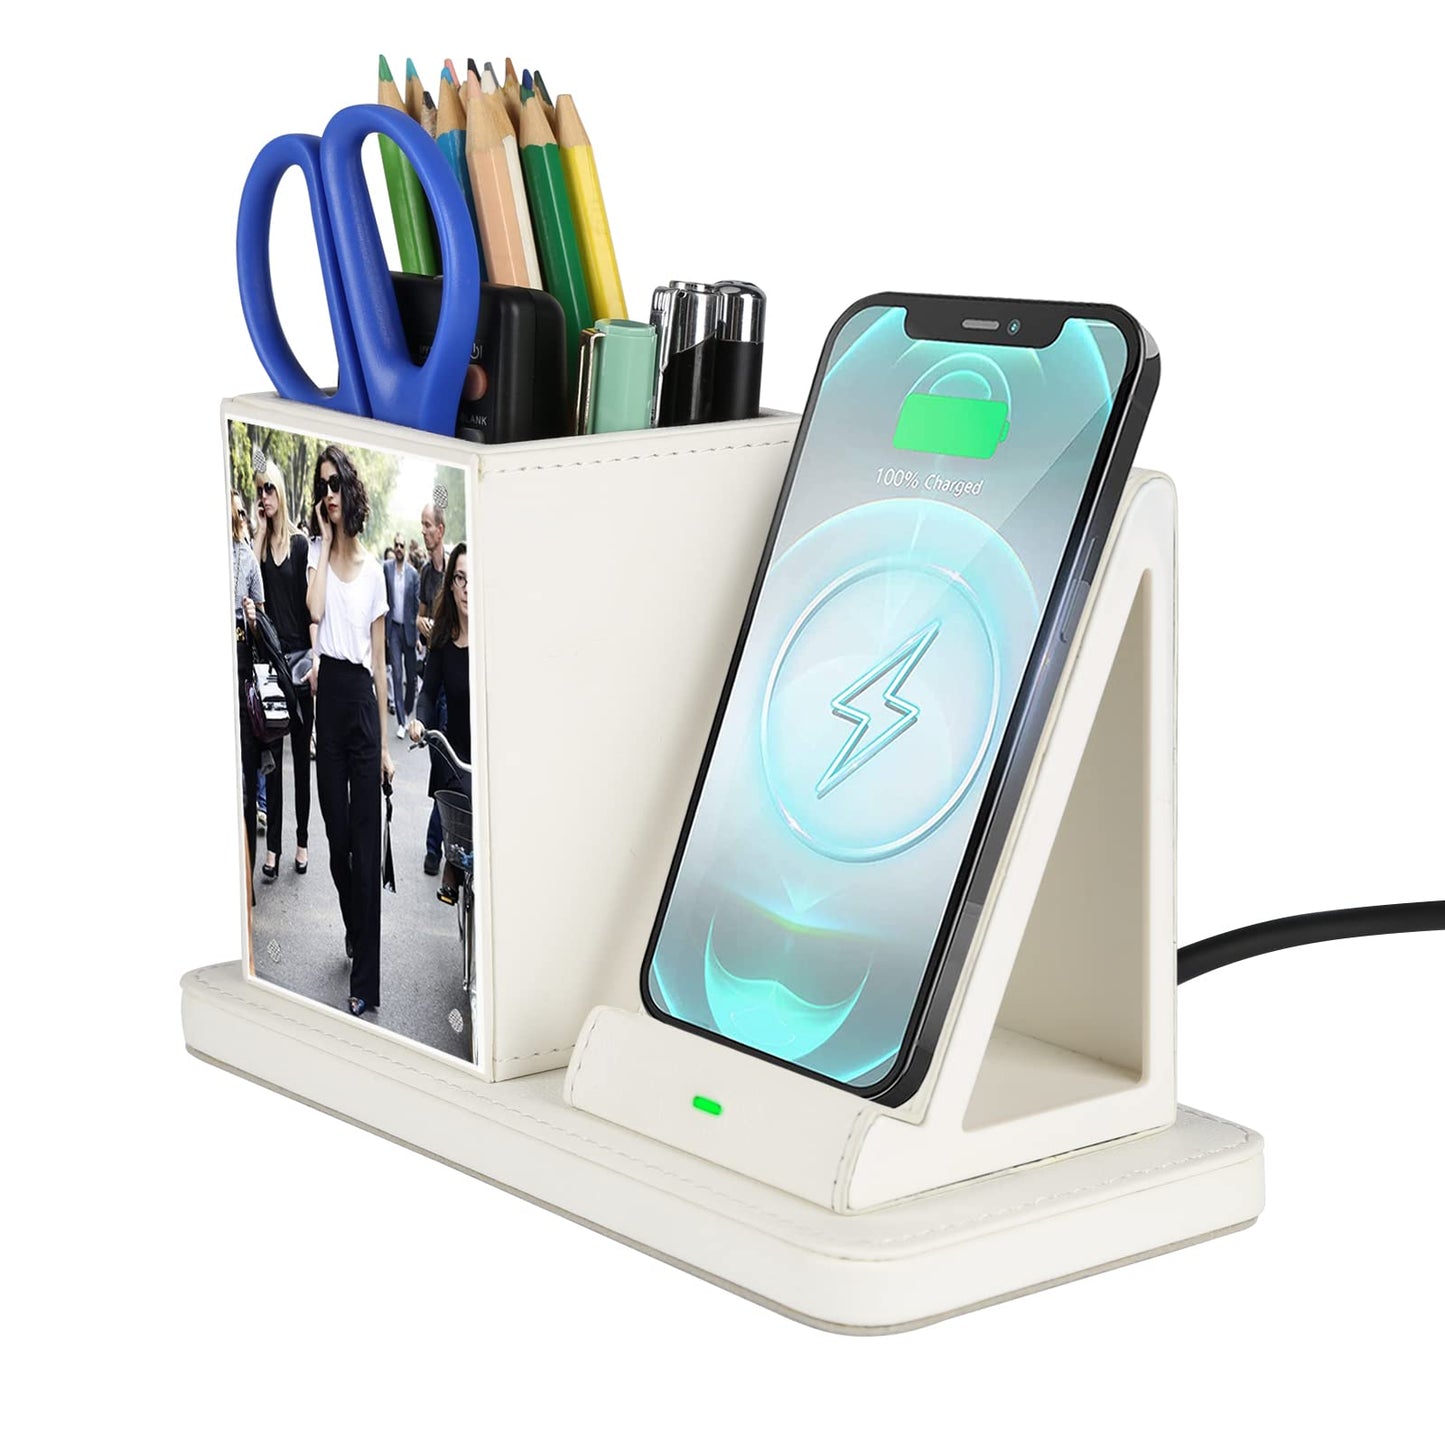 Wireless Charger with Desk Organizer, Wireless Charging Station for iPhone 14/14 Pro/13/12/11/Samsung Galaxy S23/S22/S21/S20/Note 20/Note 10, Wireless Charging Stand with Leather, Black